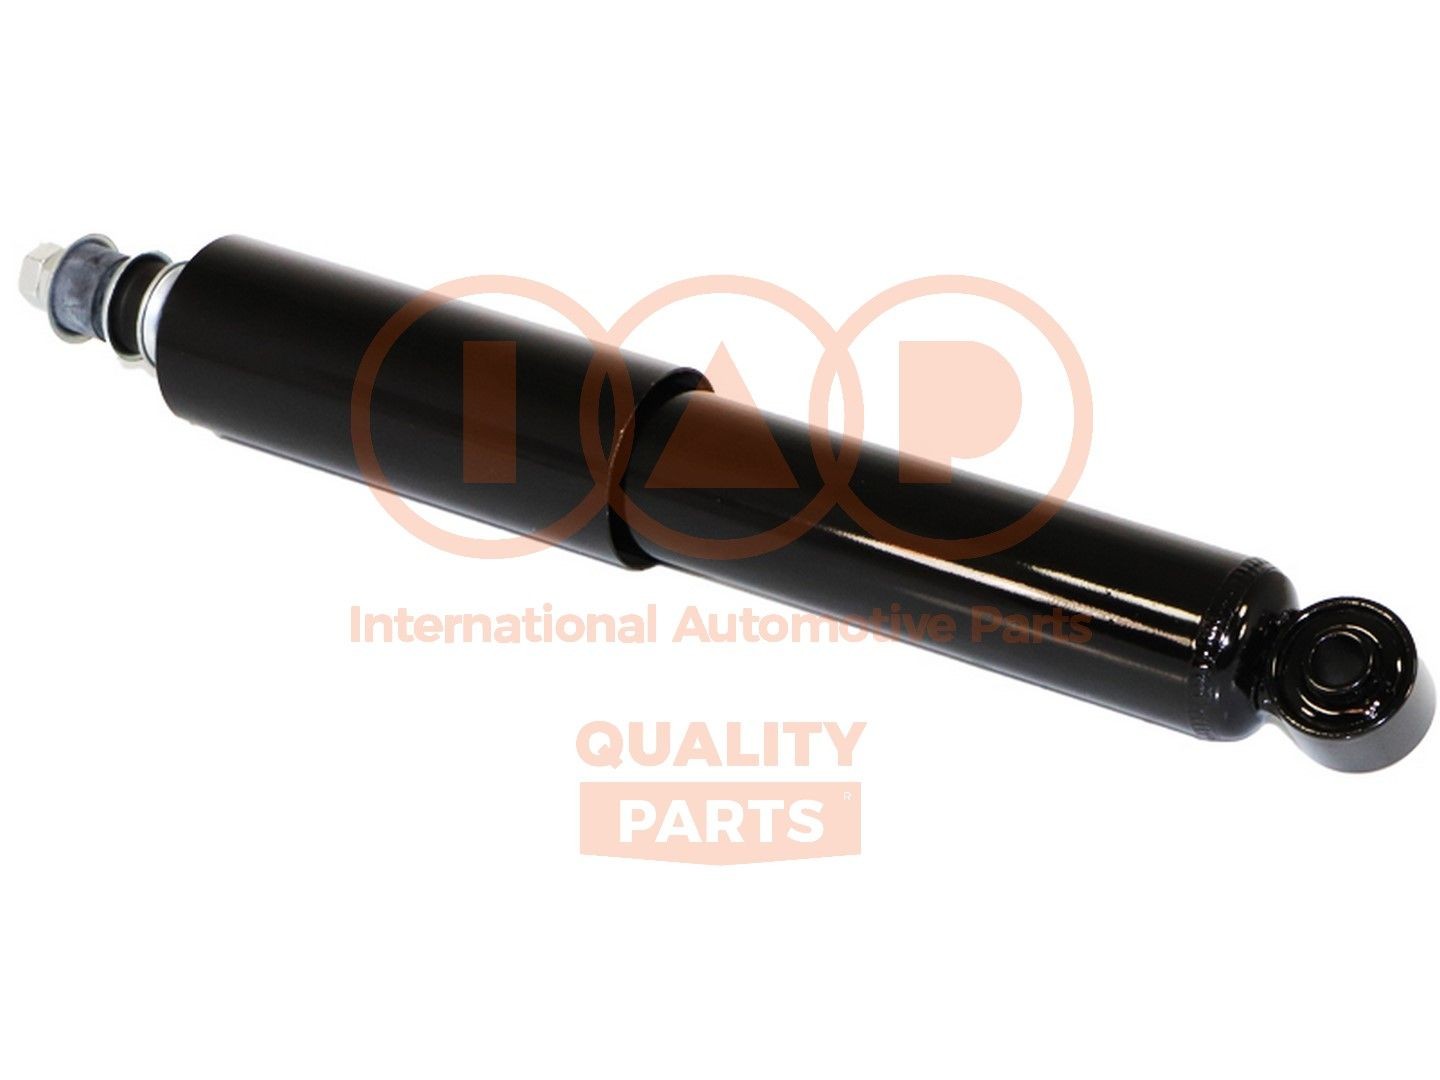 IAP QUALITY PARTS 504-13170 Shock absorber 56100MB40A